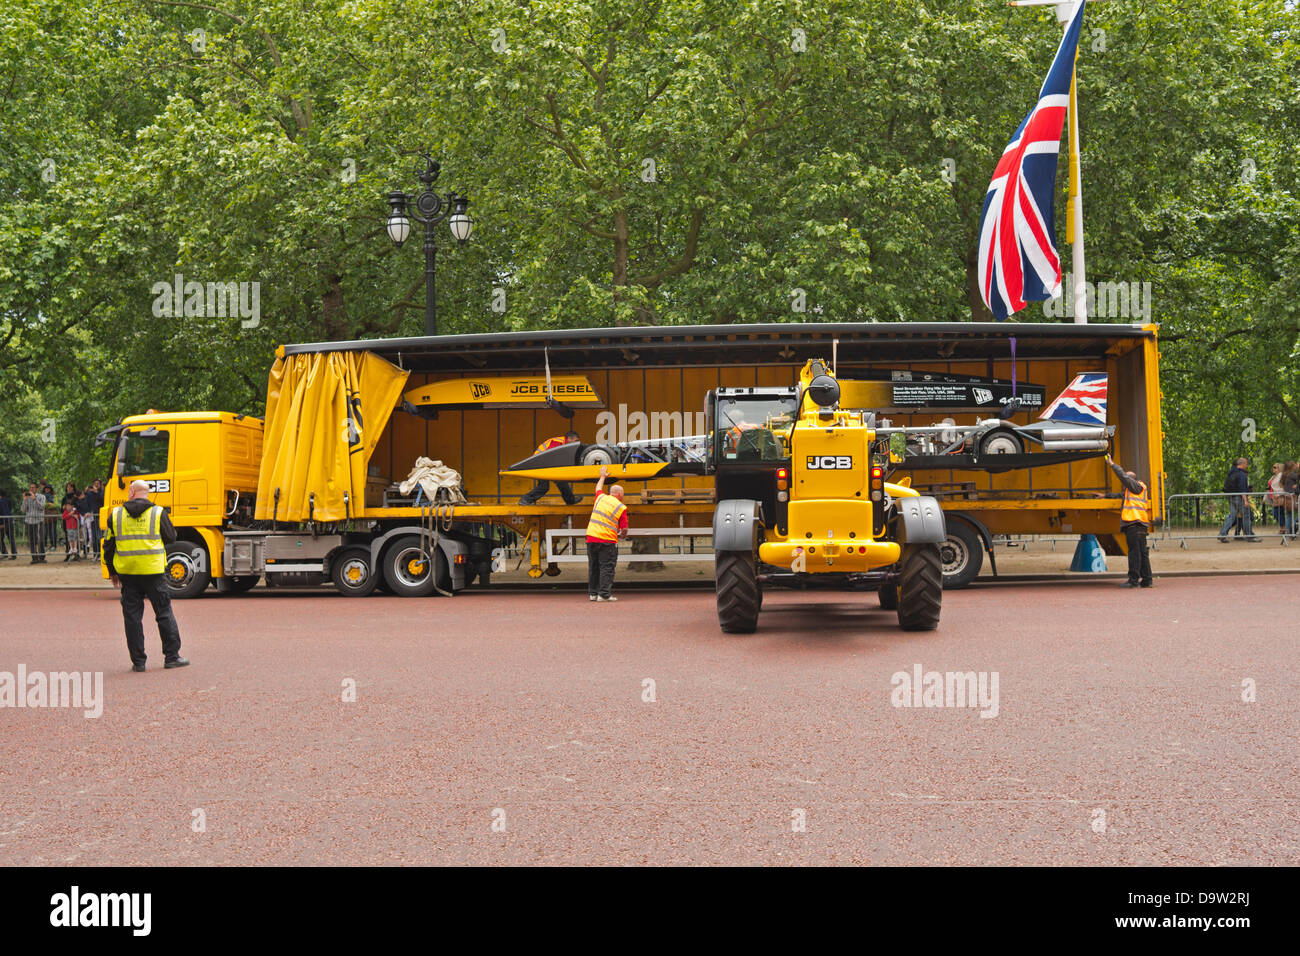 Loading the JCB dieselmax by forklift onto a lorry. Stock Photo